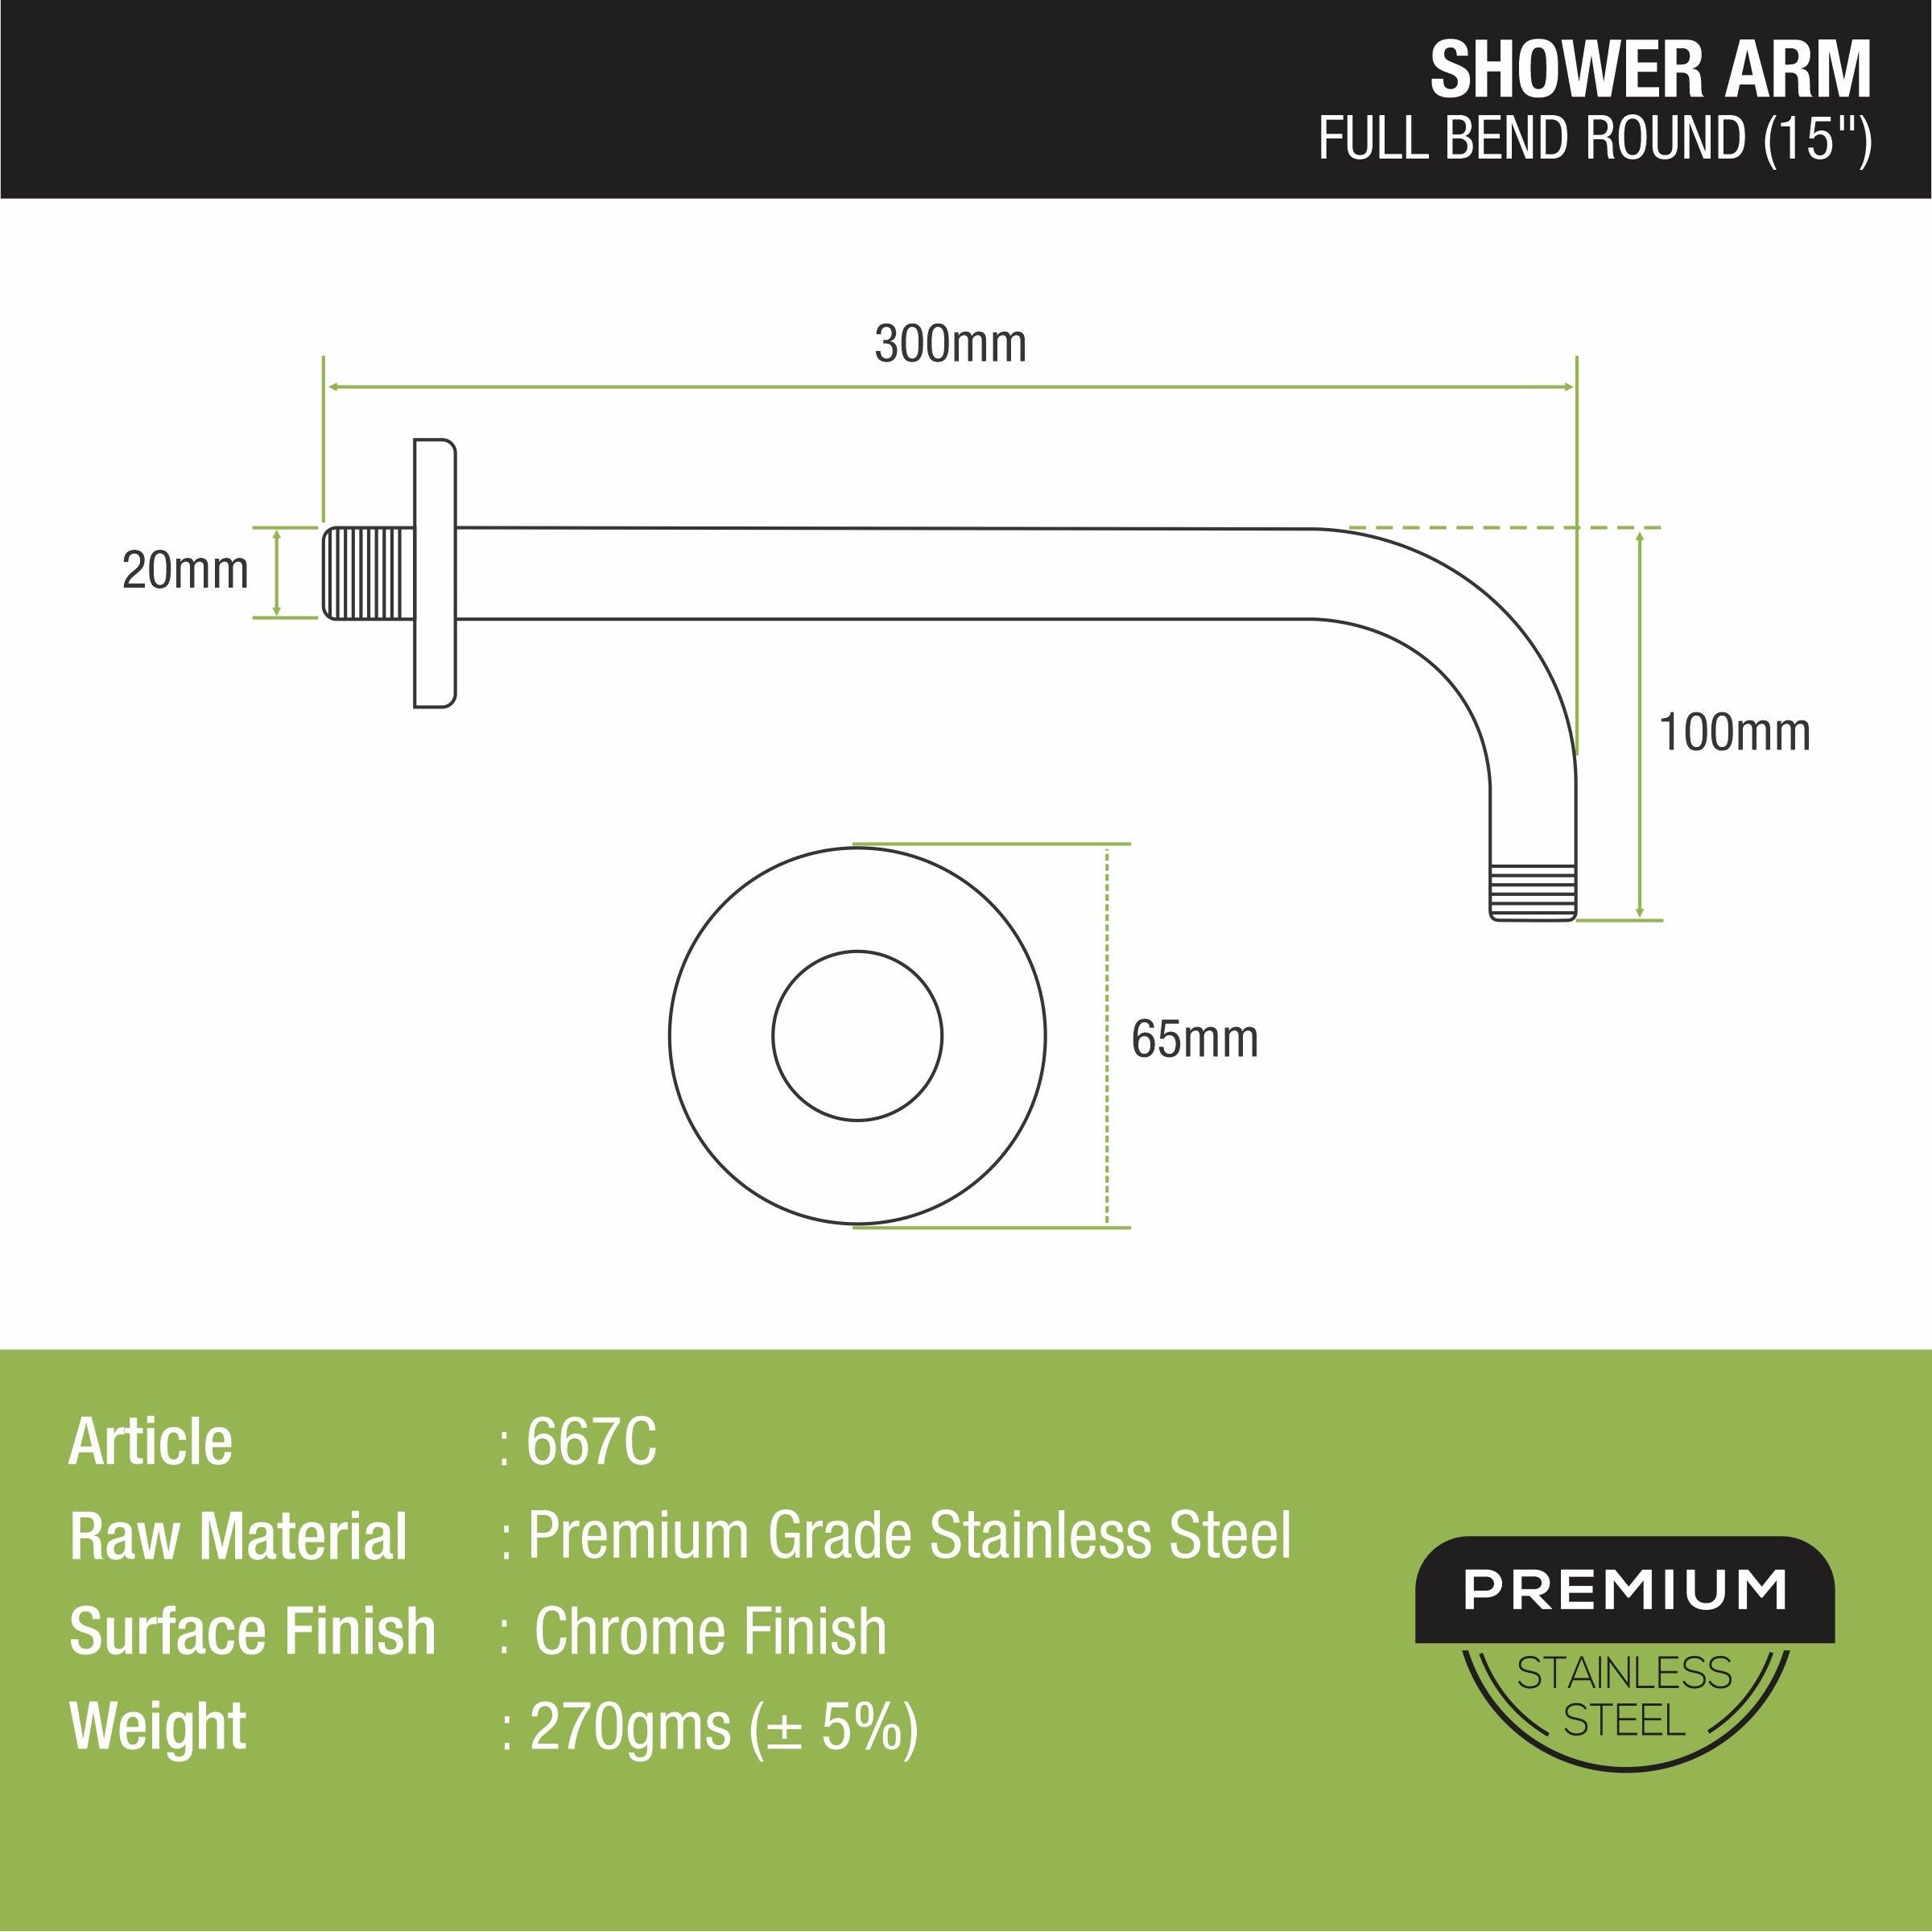 Full Bend Round Shower Arm (15 Inches) sizes and dimensions